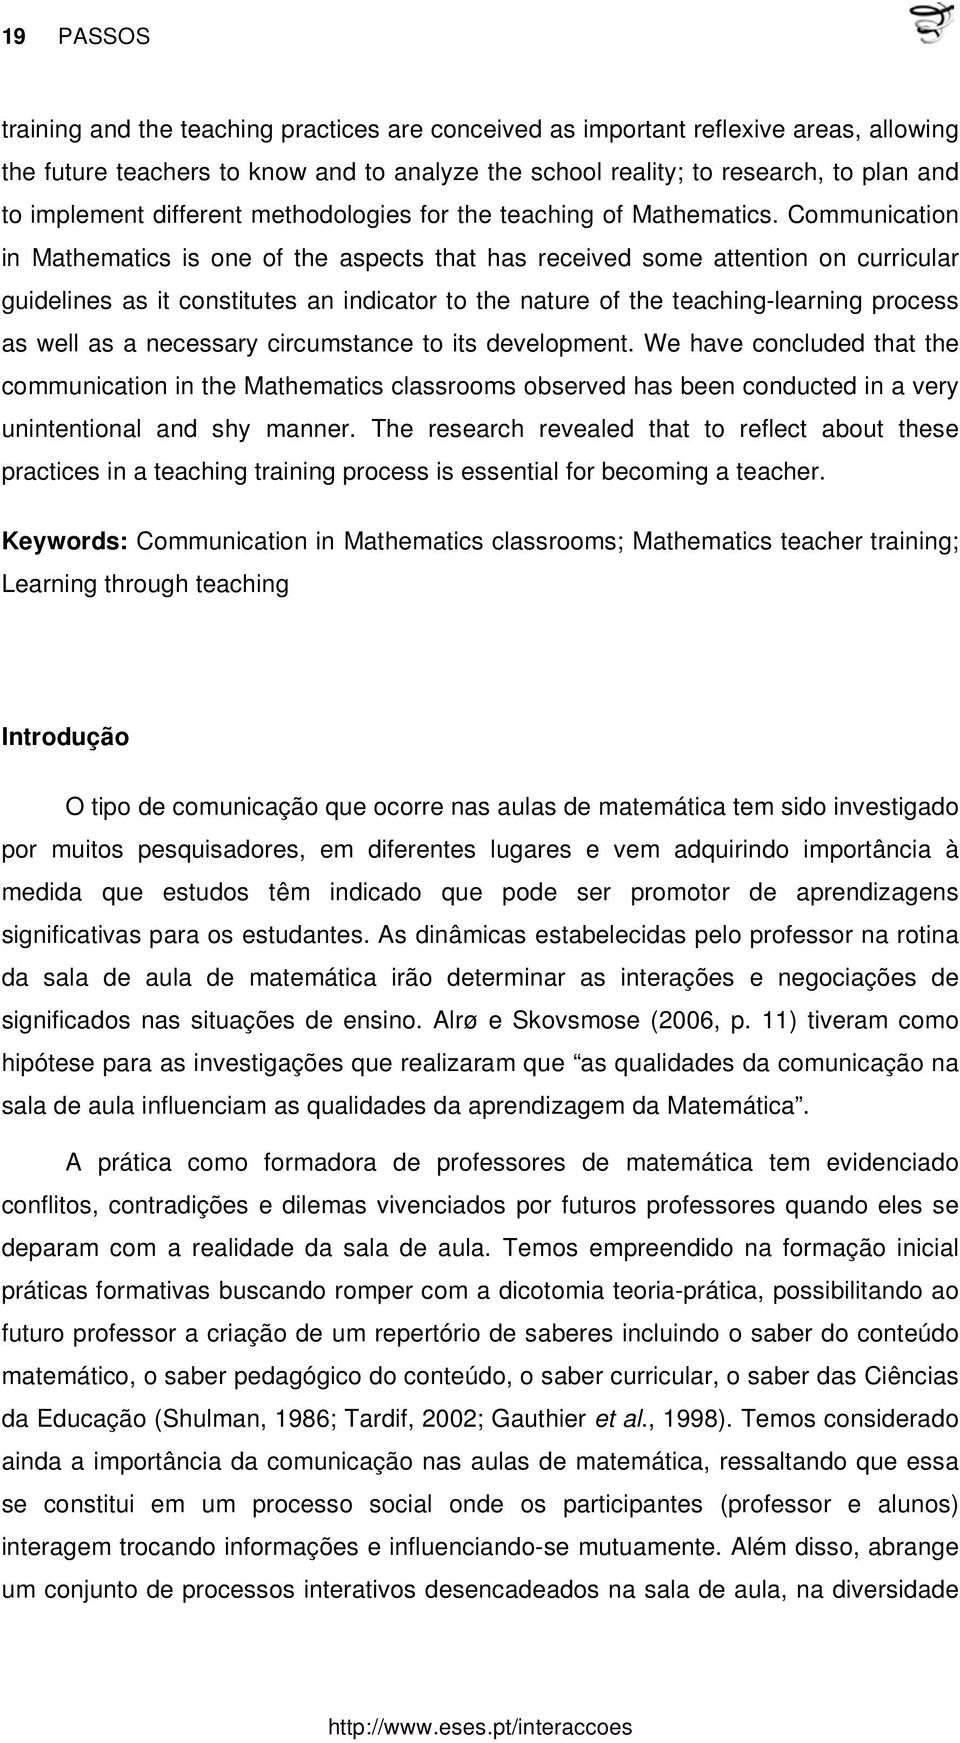 Communication in Mathematics is one of the aspects that has received some attention on curricular guidelines as it constitutes an indicator to the nature of the teaching-learning process as well as a